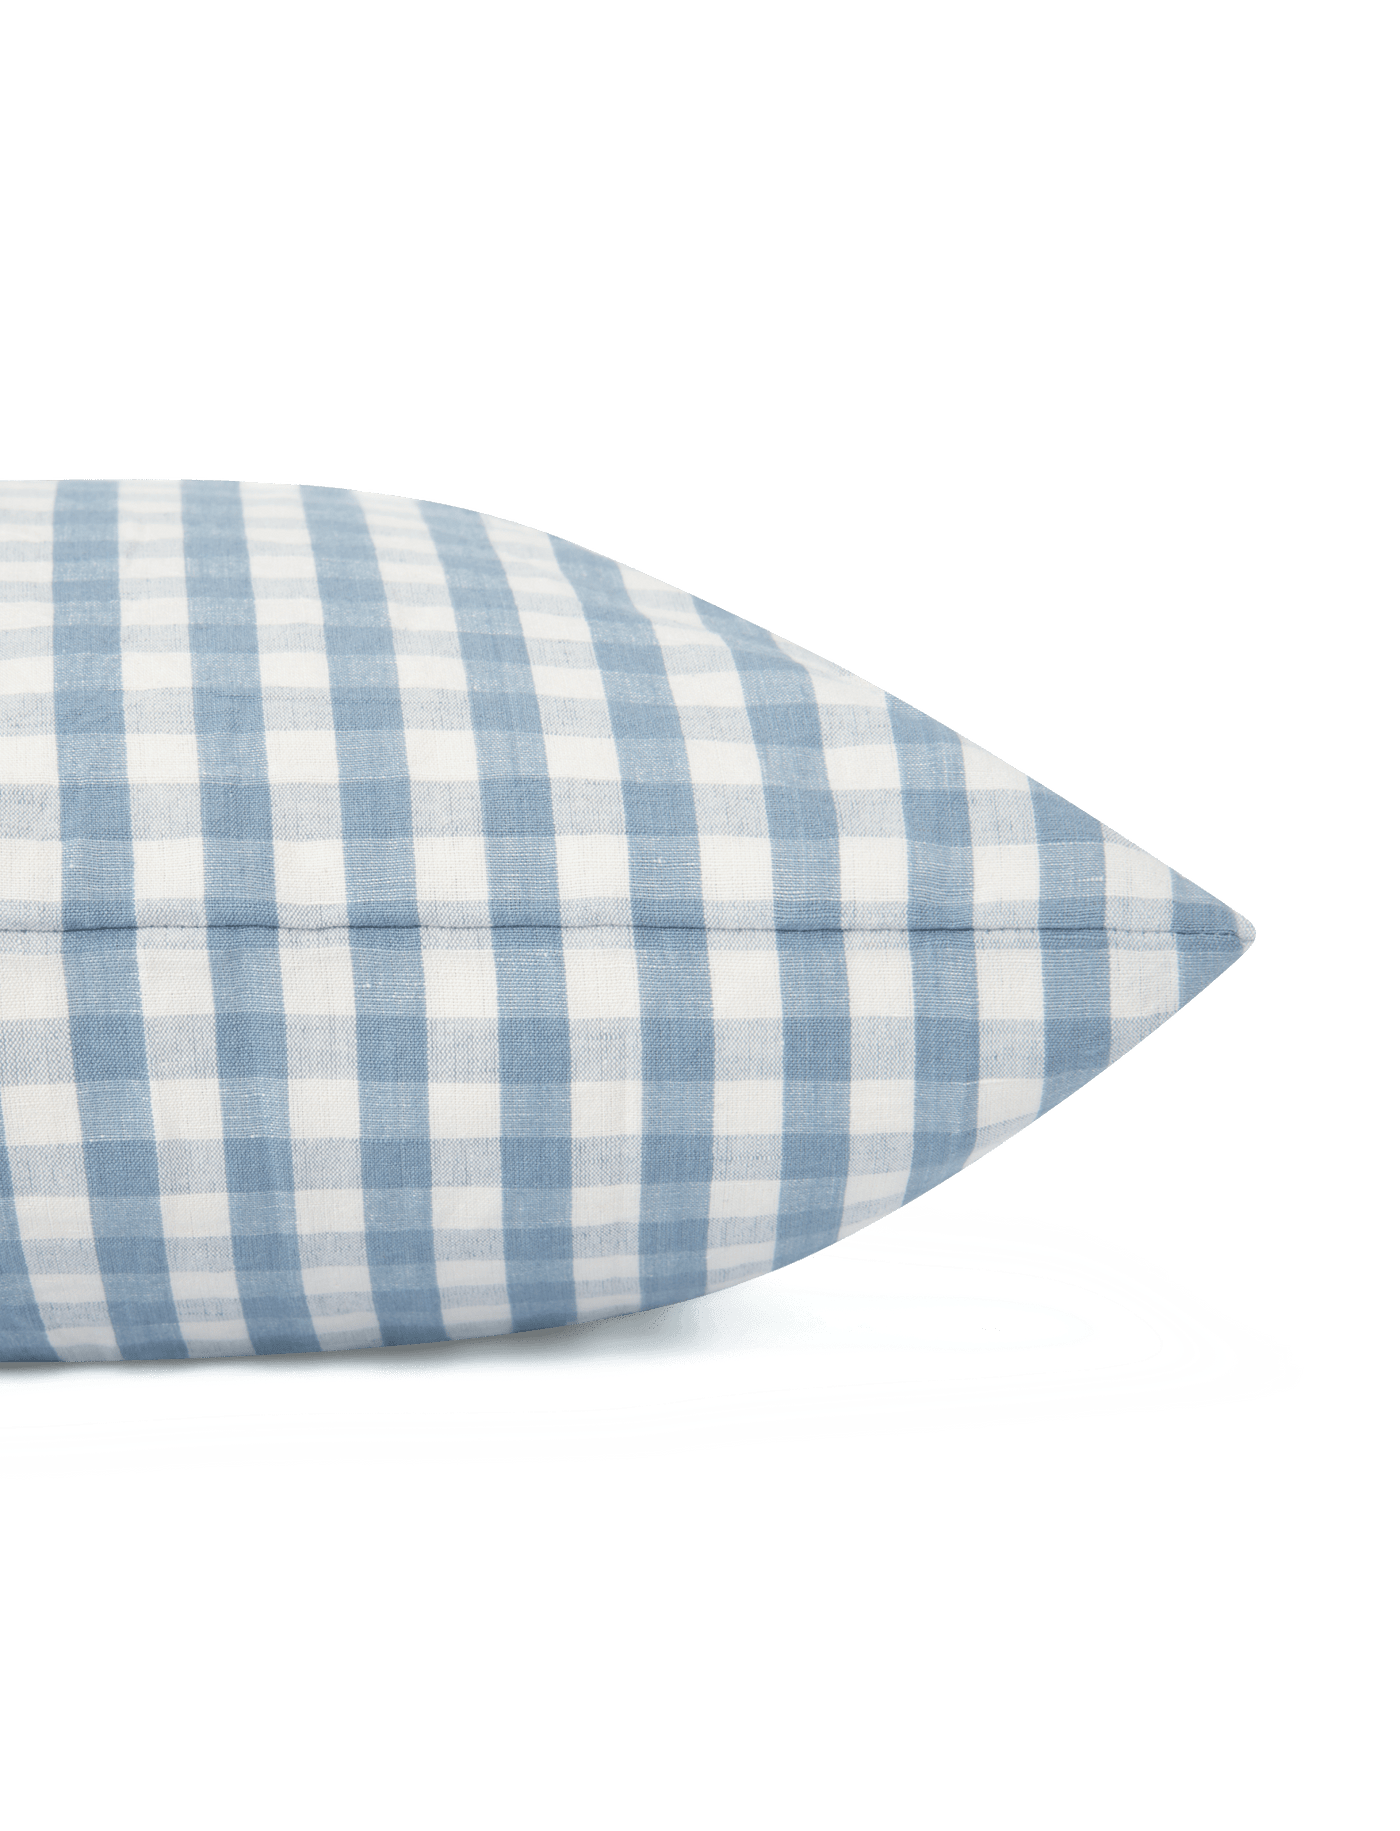 Sienna Pude - Gingham Blue